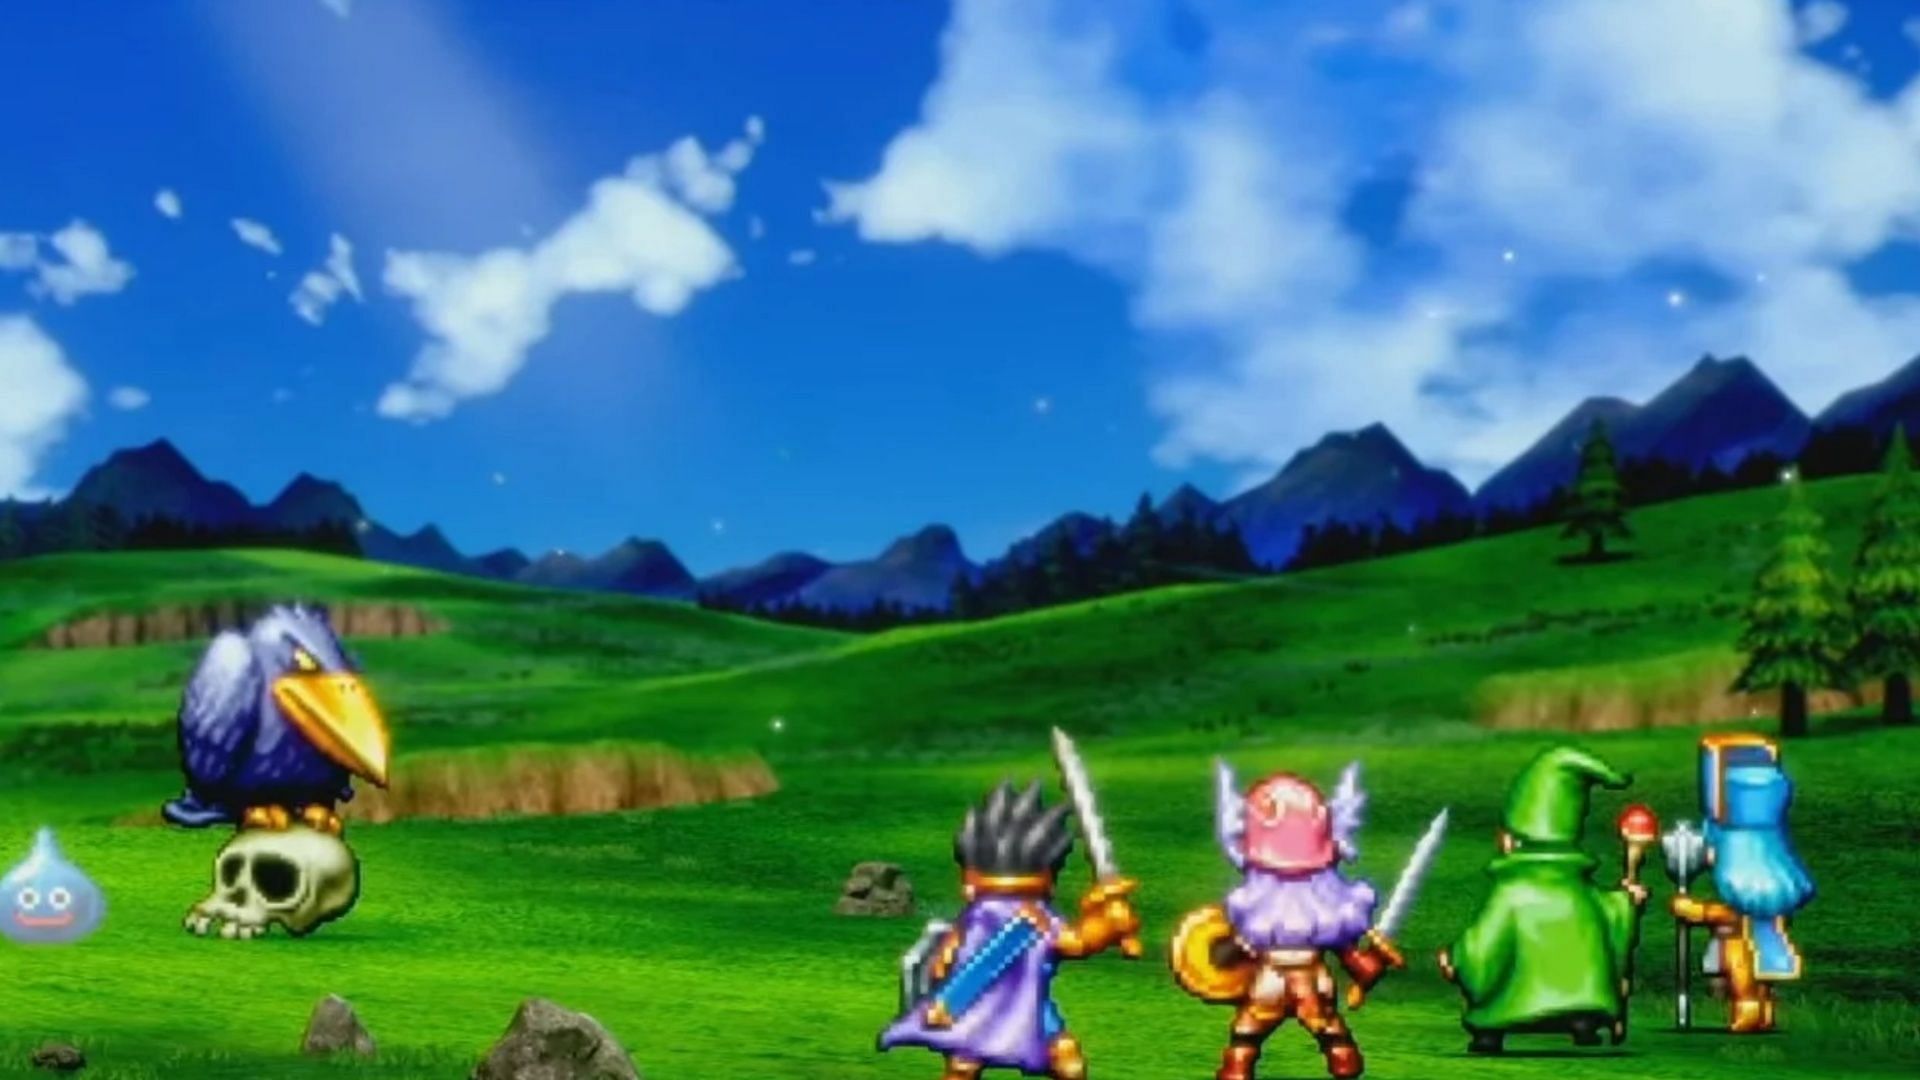 Everybody&rsquo;s favorite Dragon Quest adventure coming to consoles soon (Image via Square Enix)